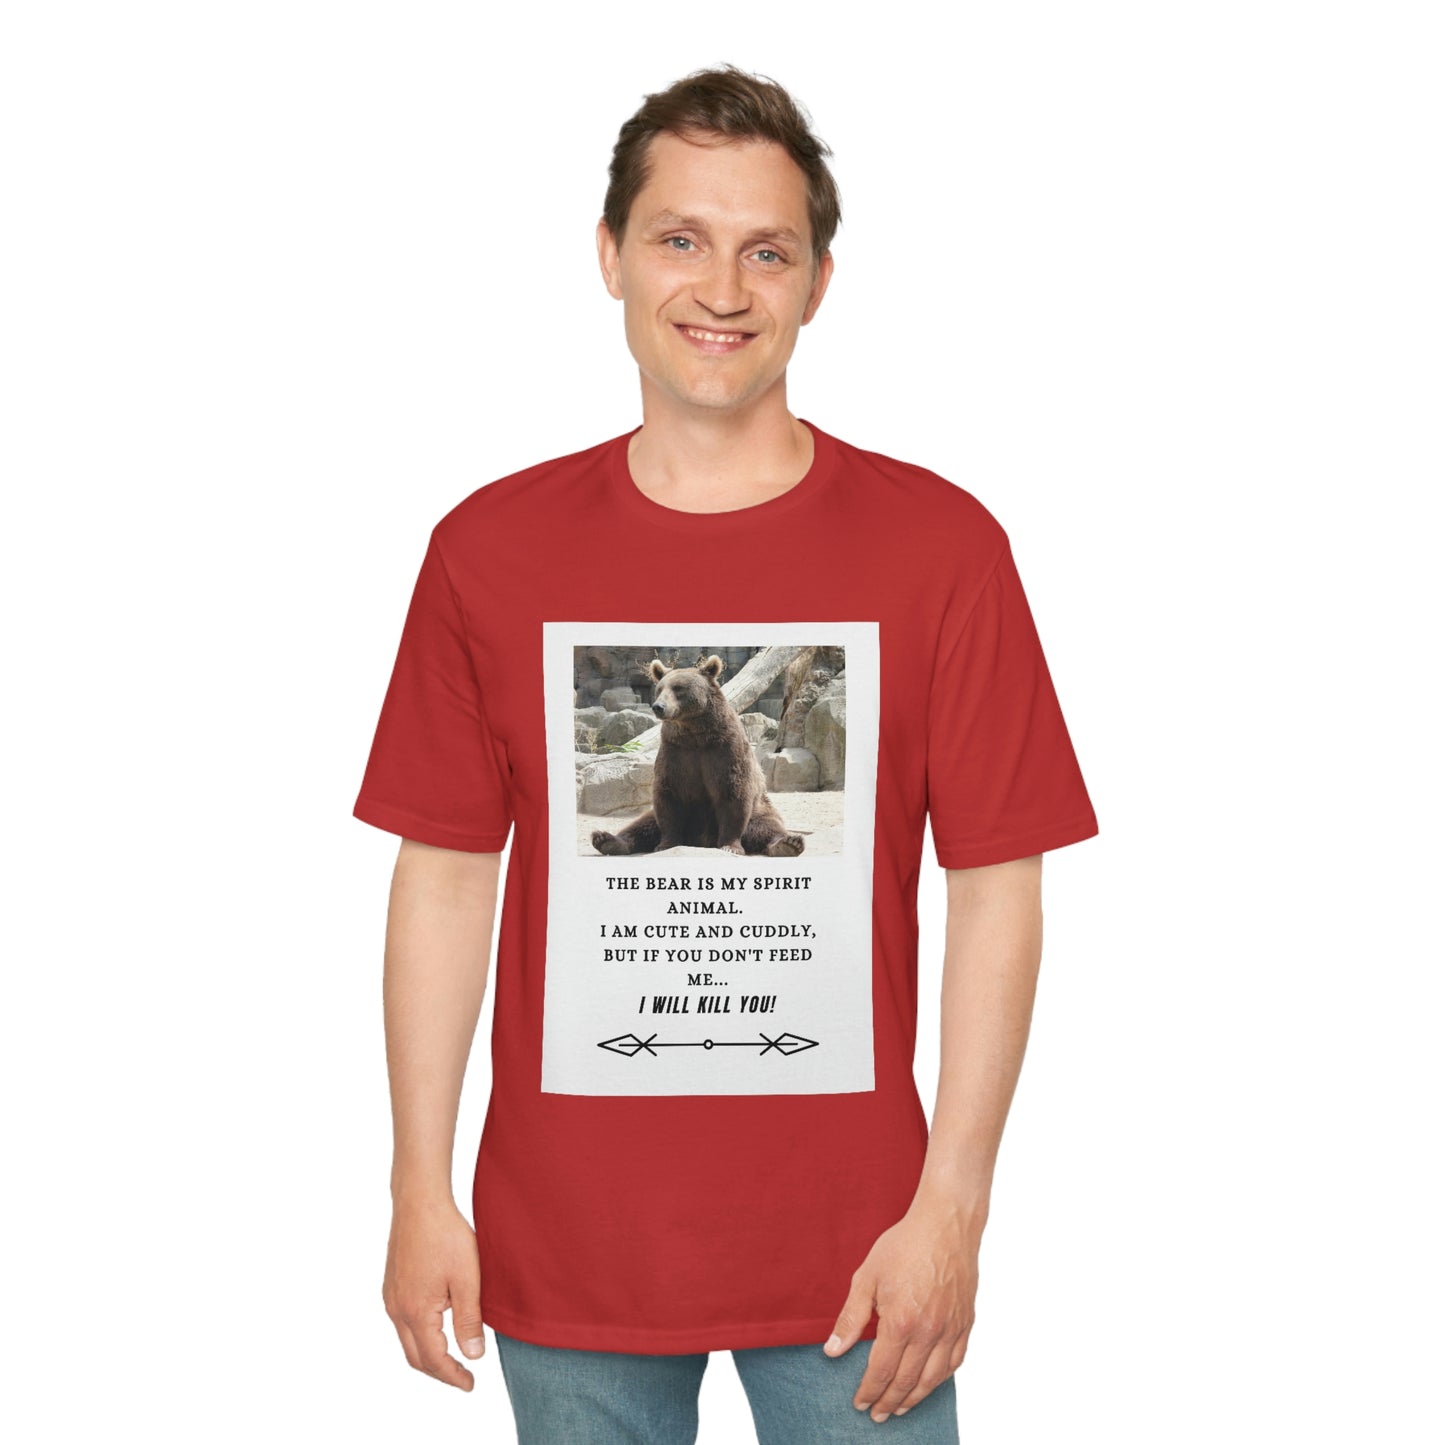 Perfect Weight® Tee, The Bear is My Spirit Animal